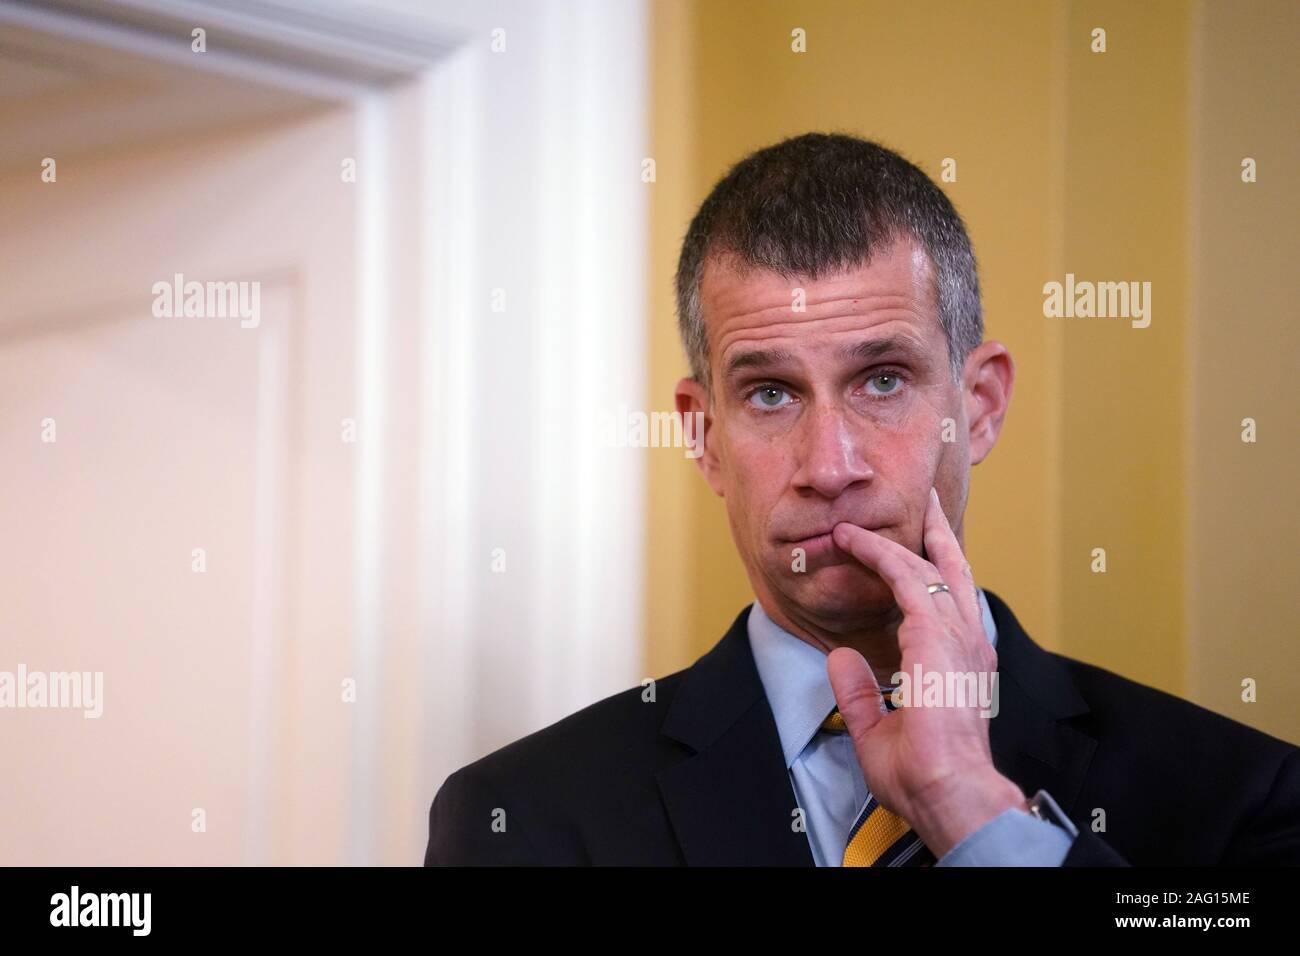 Steve Castor, counsel for the Republicans, before a meeting of the United States House Committee on Rules to consider H. Res. 755 'Impeaching Donald John Trump, President of the United States, for high crimes and misdemeanors' on Capitol Hill in Washington, DC on December 17, 2019. Credit: Erin Schaff/Pool via CNP /MediaPunch Stock Photo